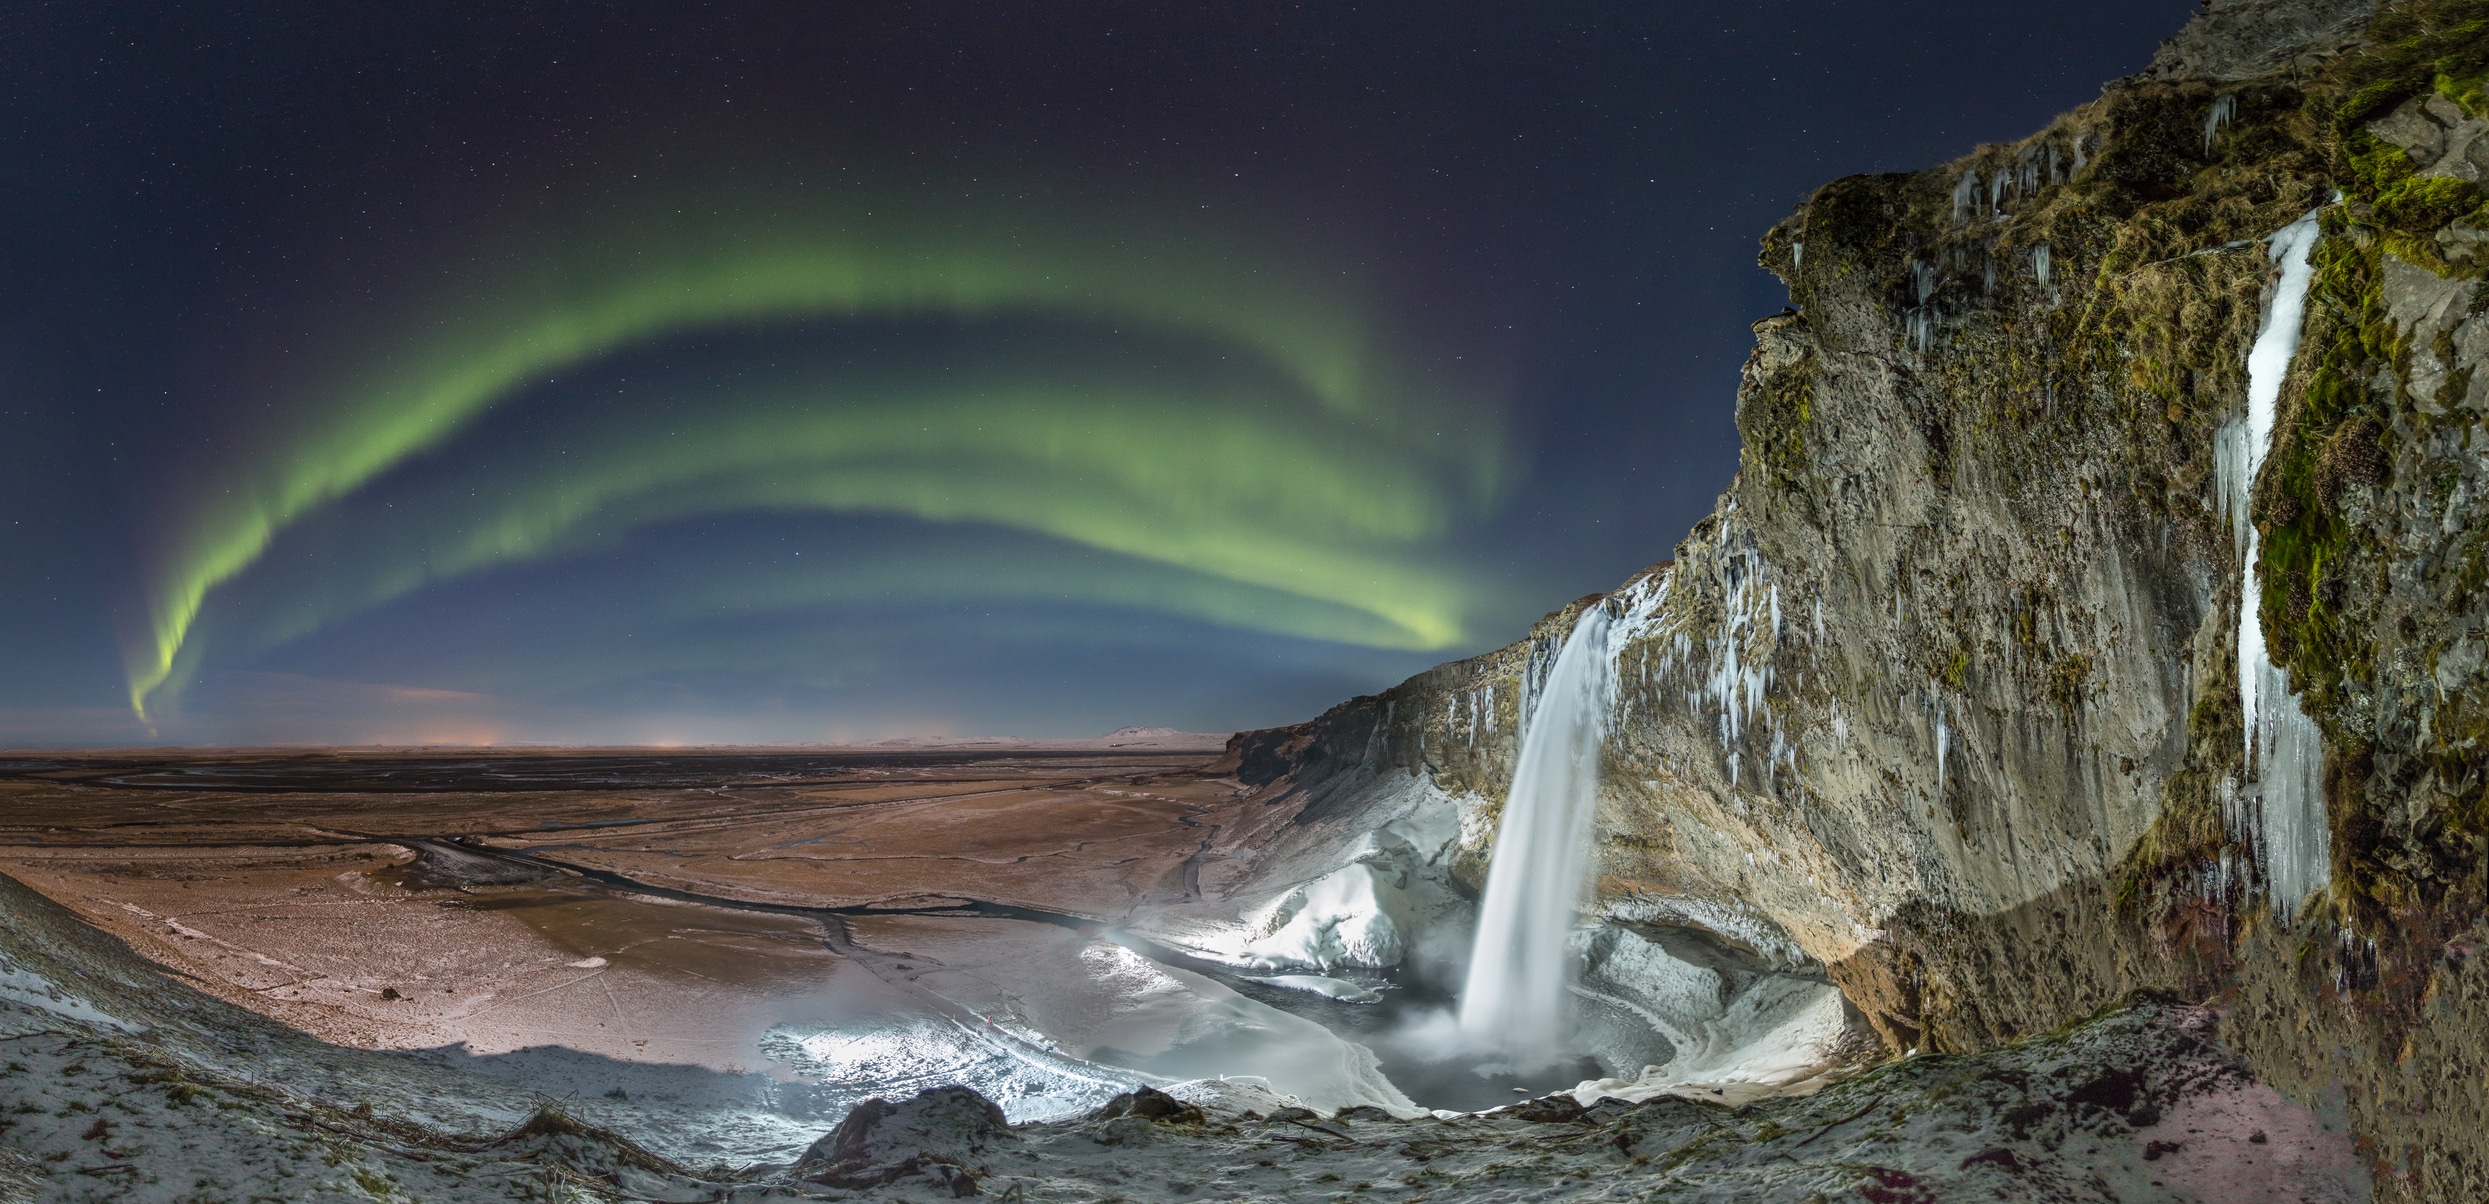 waterfall and northern lights in iceland 